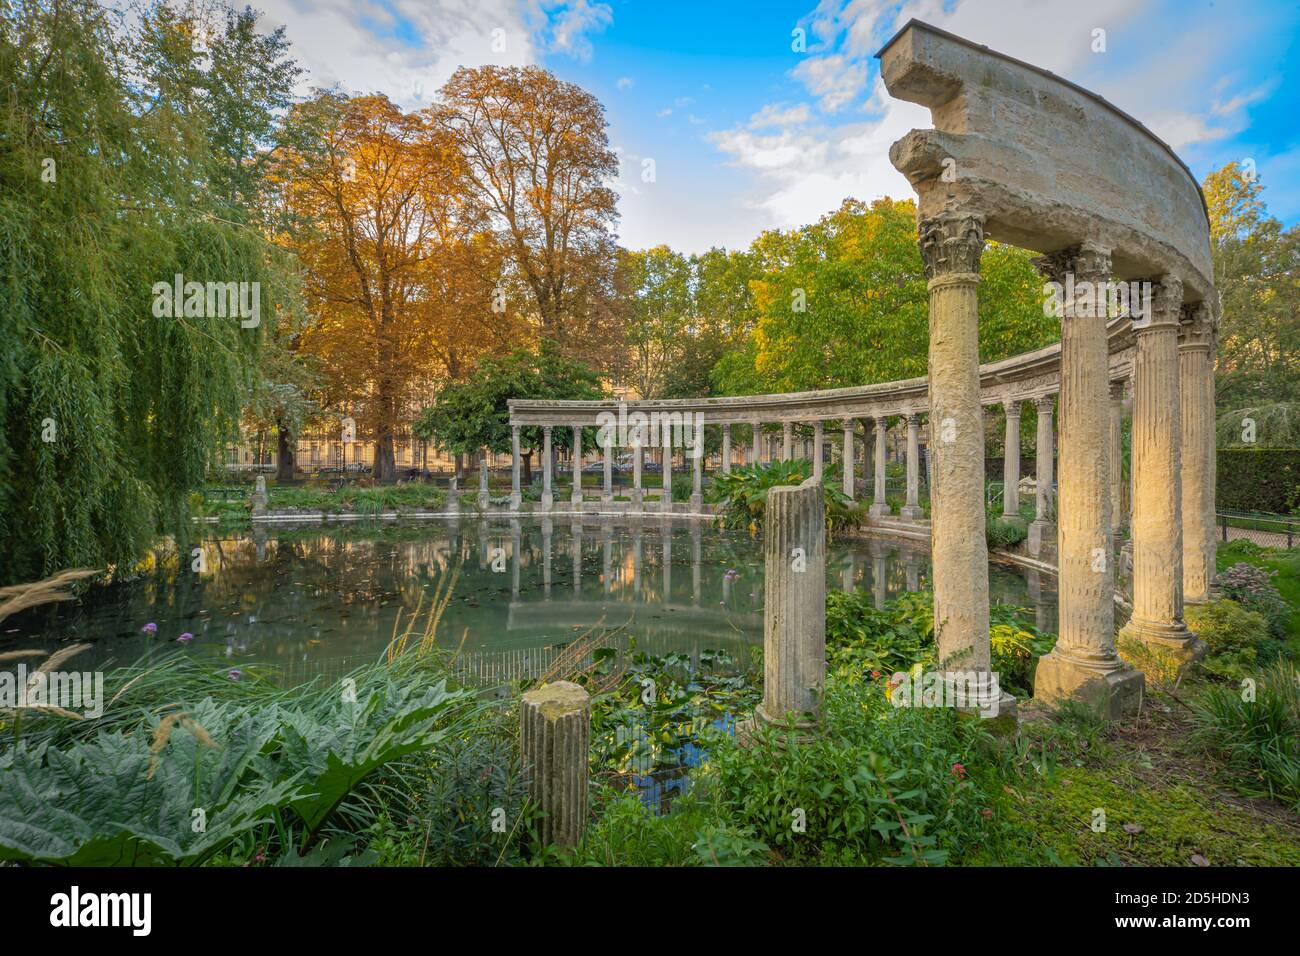 Paris, France - 10 11 2020: Golden hour in Parc Monceau in autumn. Oval basin bordered by a Corinthian colonnade Stock Photo